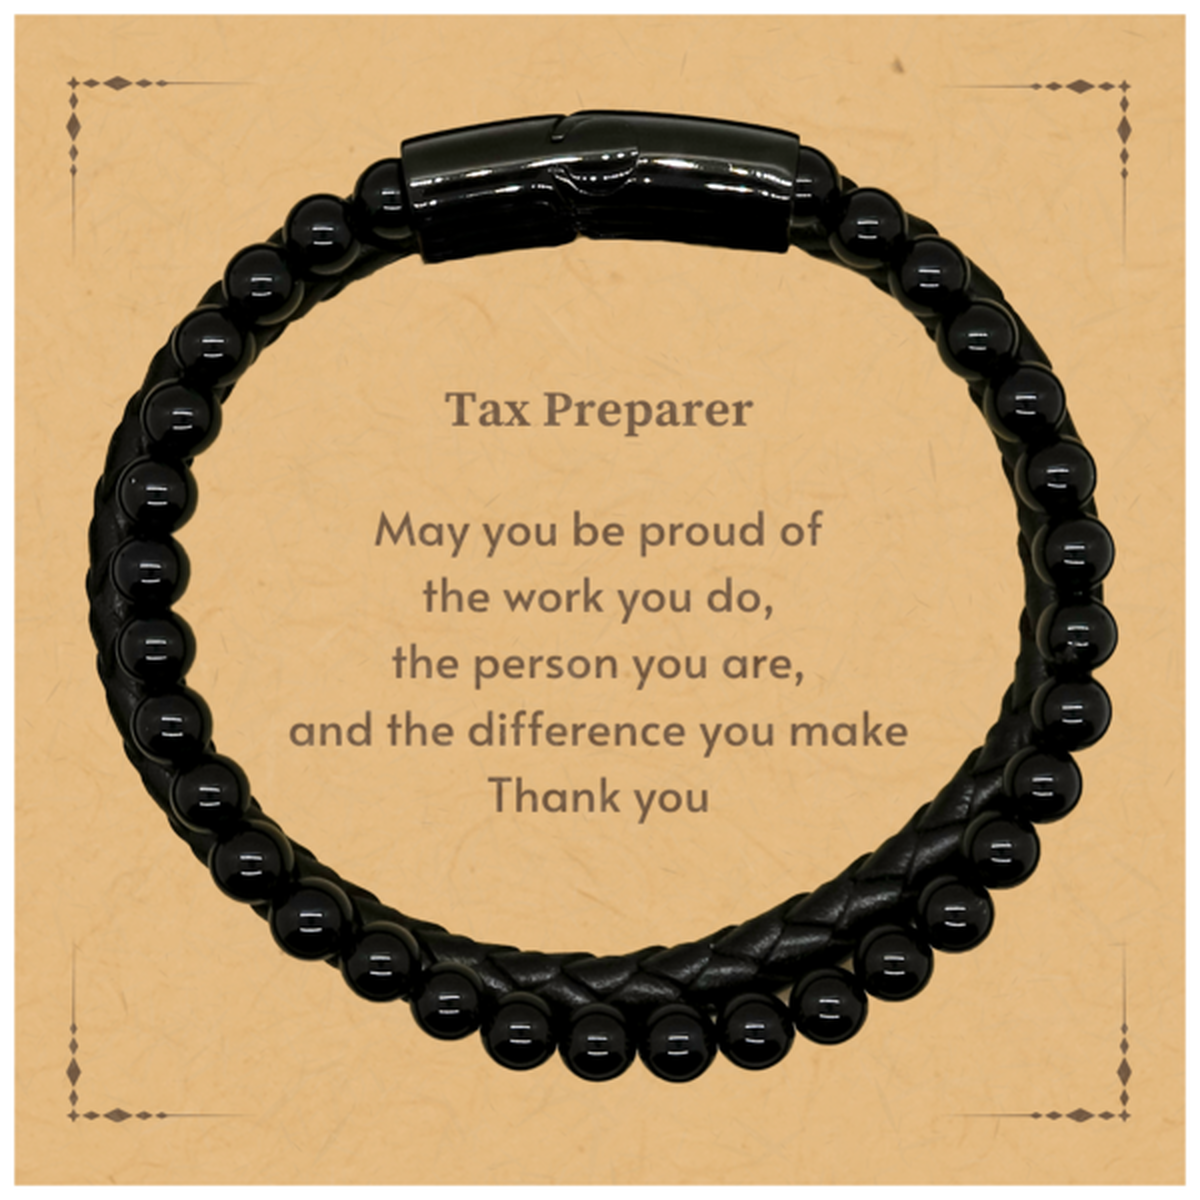 Heartwarming Stone Leather Bracelets Retirement Coworkers Gifts for Tax Preparer, Tax Preparer May You be proud of the work you do, the person you are Gifts for Boss Men Women Friends